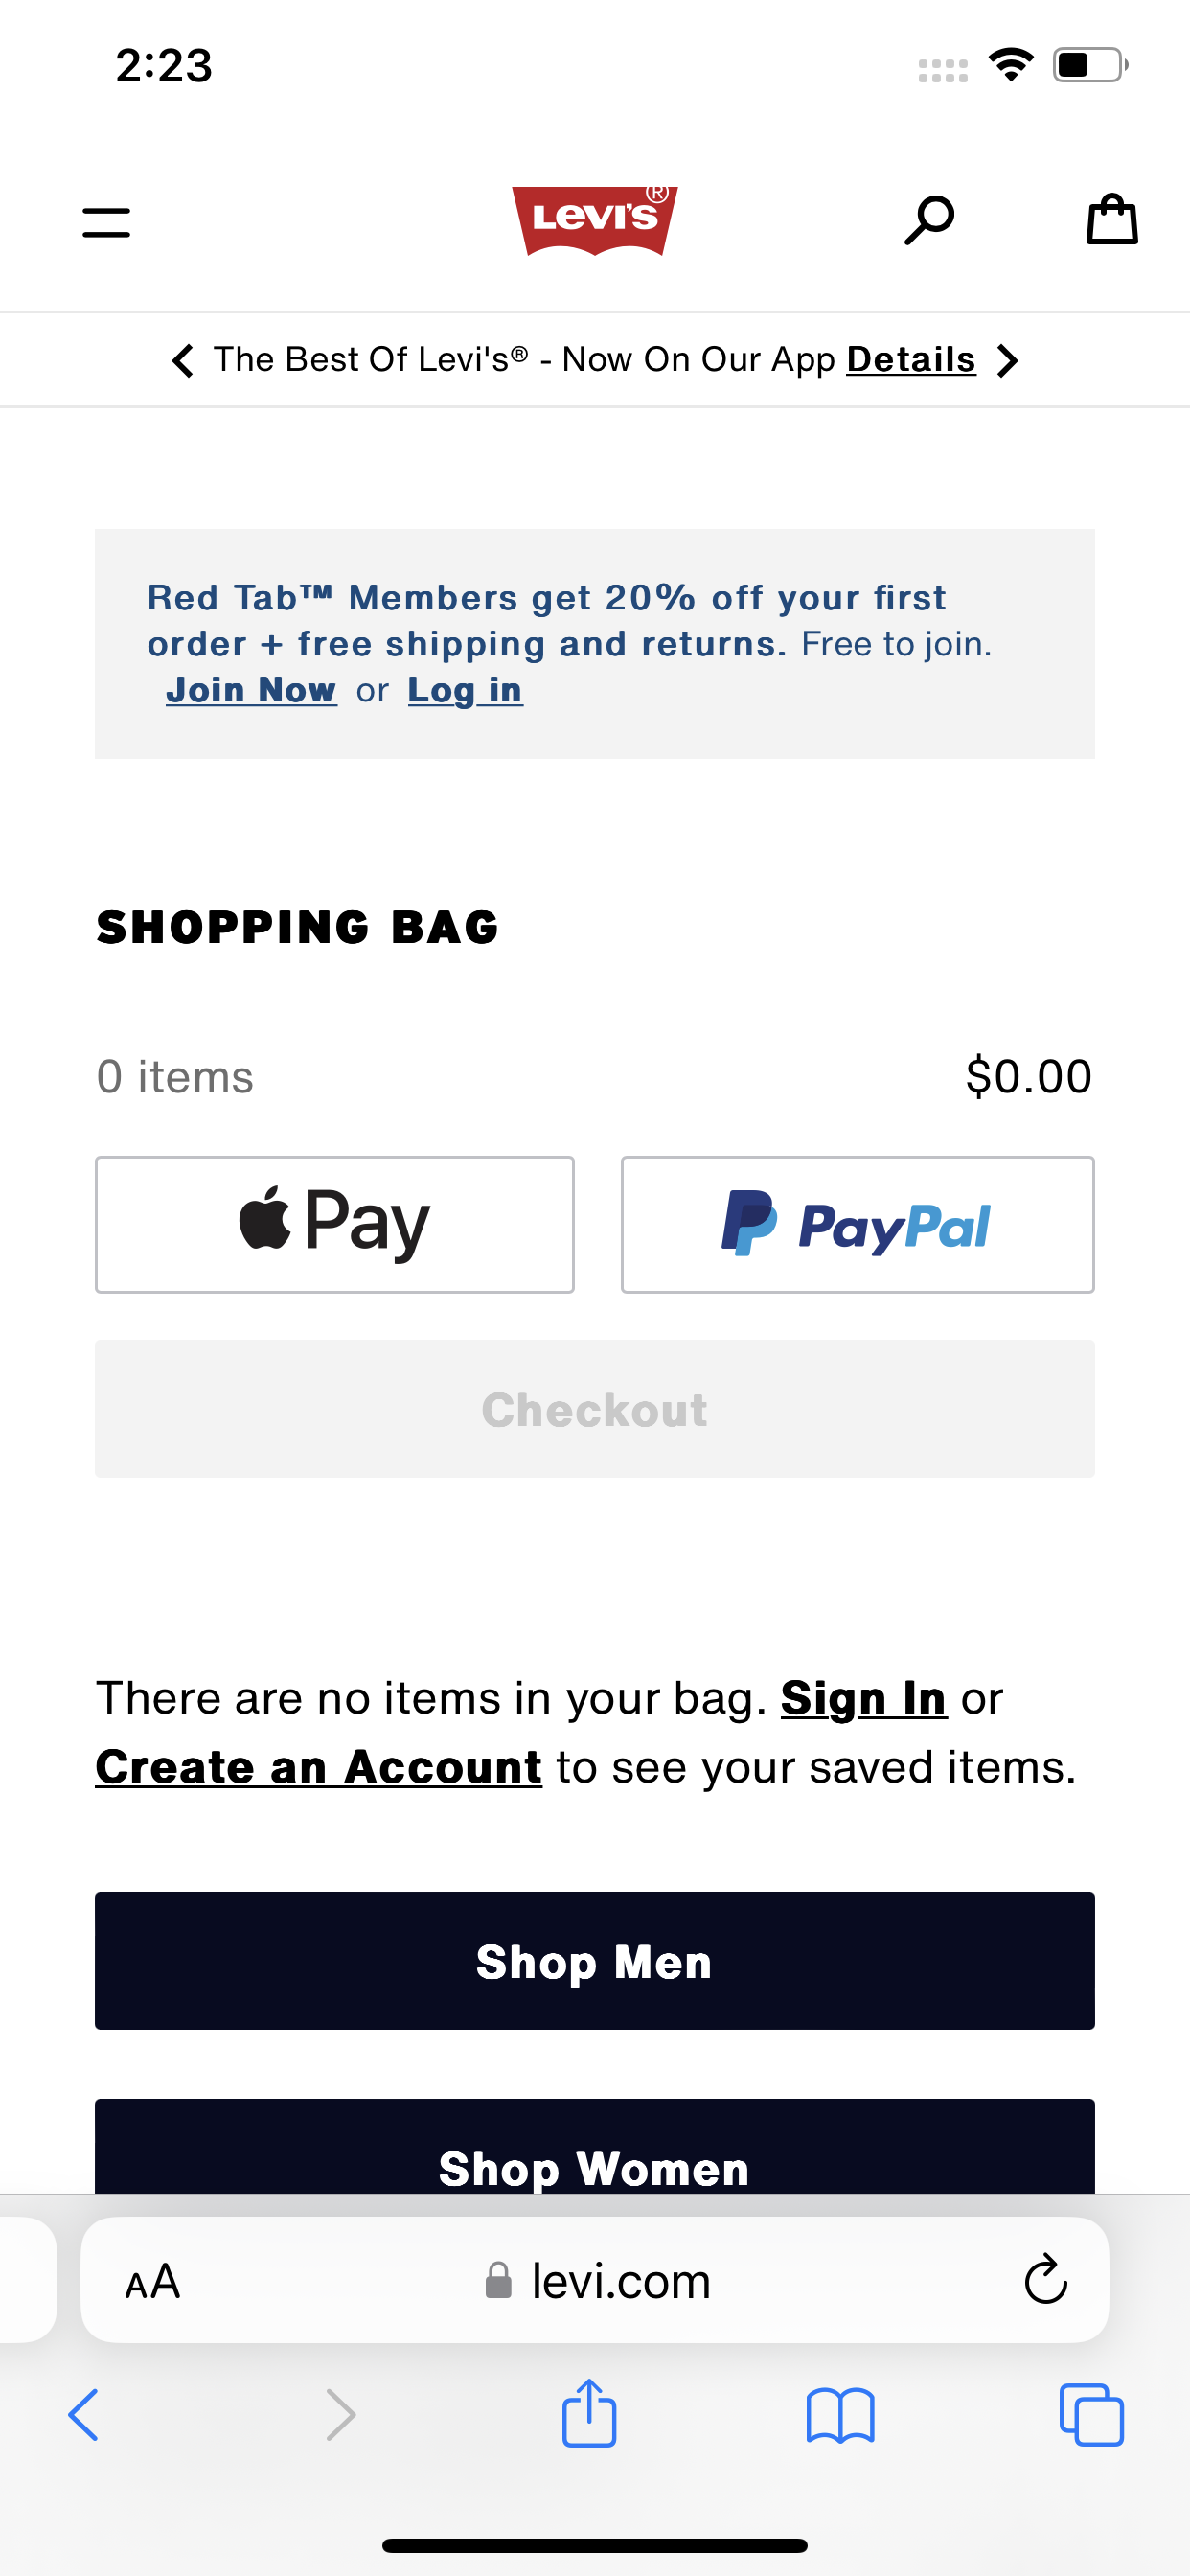 Levi's accepts Apple Pay on its website.